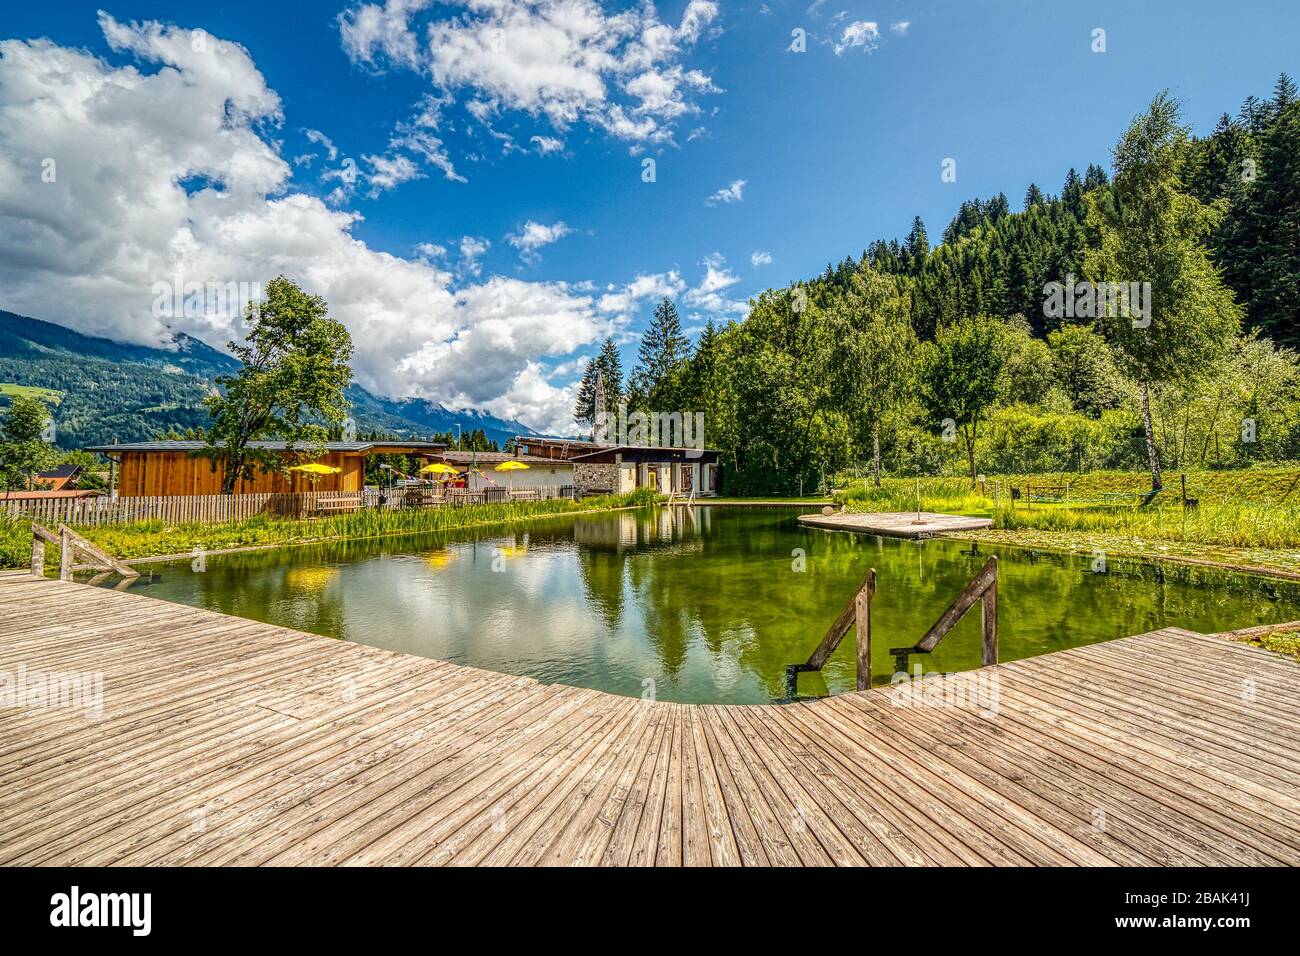 Koetschach-Mauthen (HE), AUSTRIA - AUGUST 14, 2019: the waters of the natural swimming pool are reflecting the clouds that are covering the sky Stock Photo